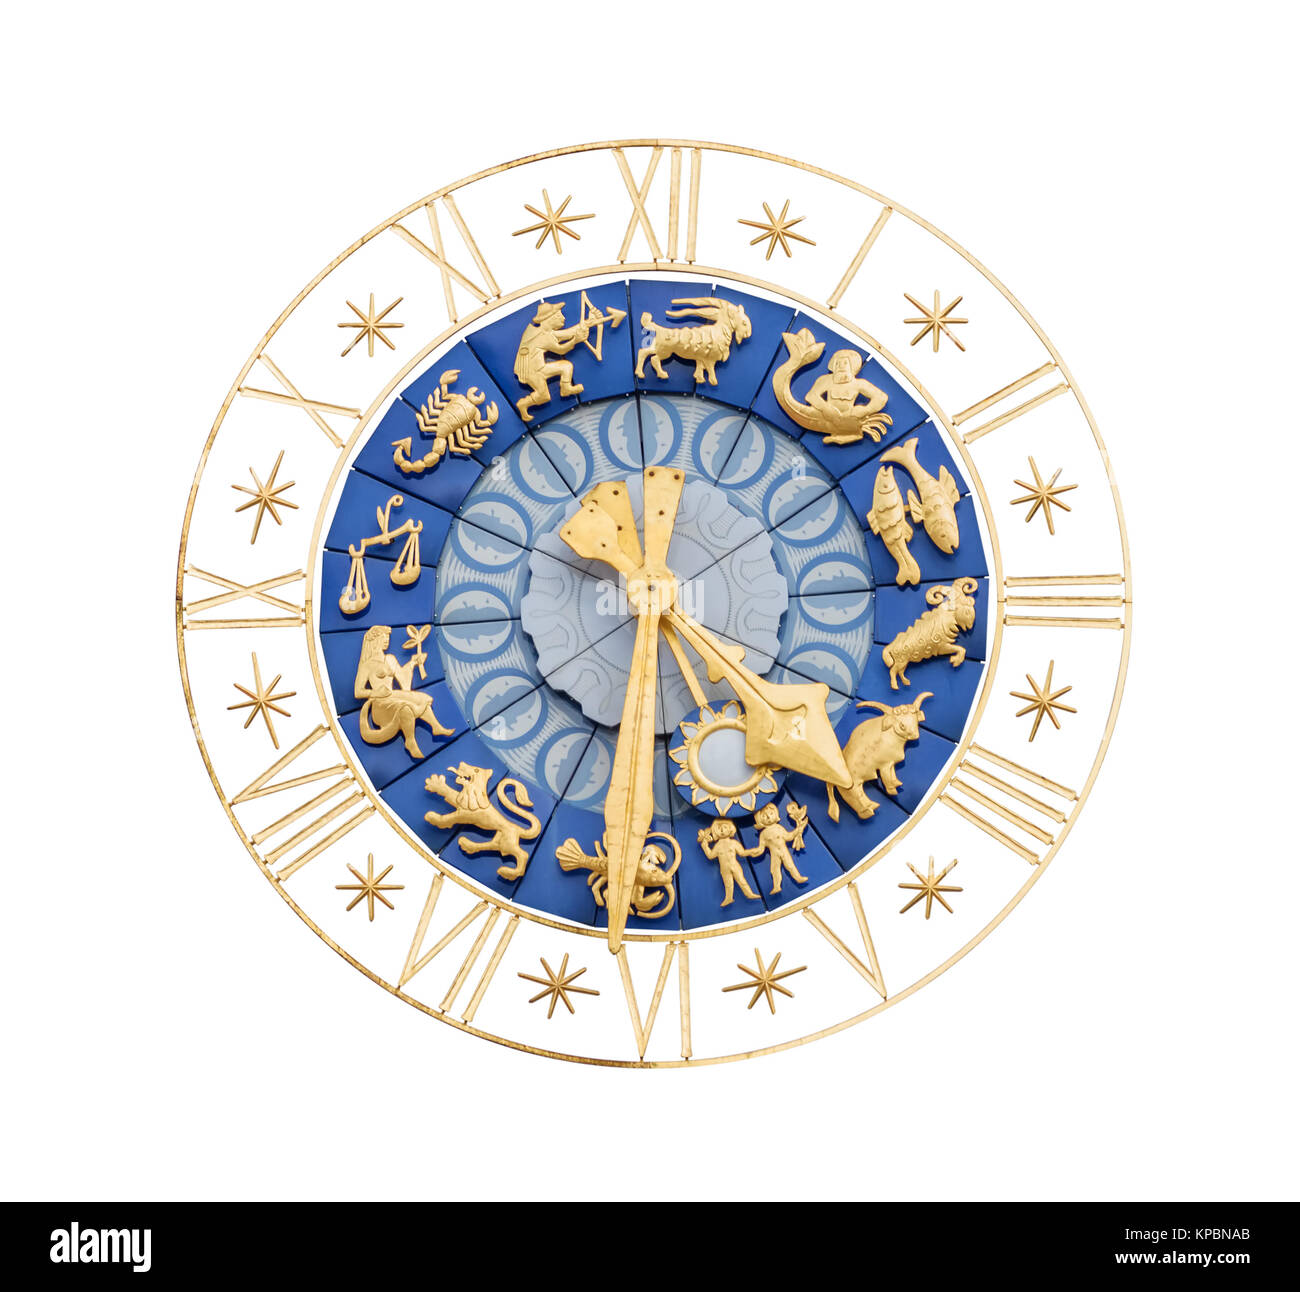 Medieval clock with Zodiac signs cutout Stock Photo